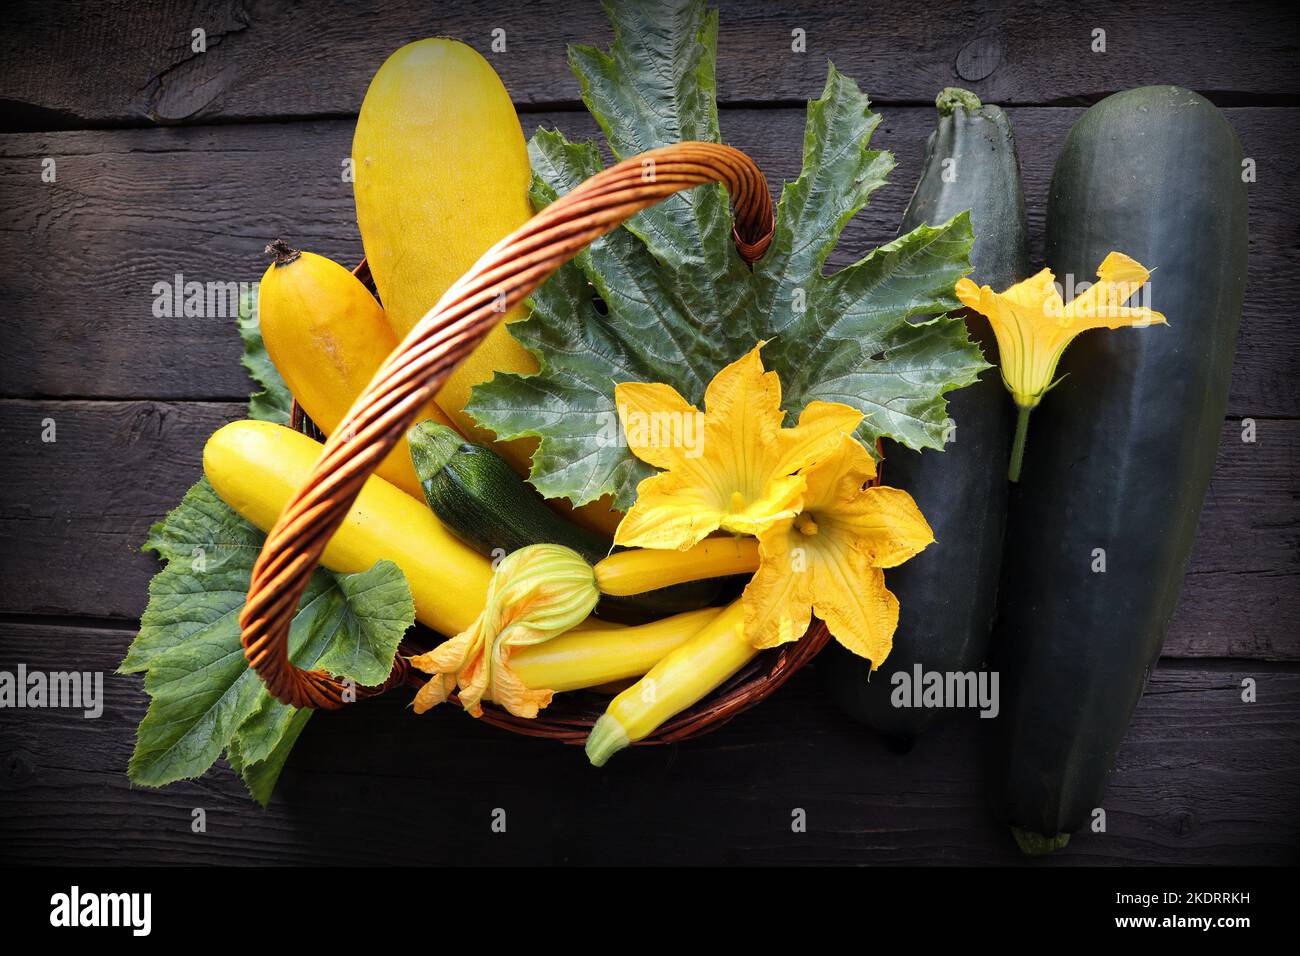 Harvest of fresh green and yellow zucchini . Zucchini with flowers on the old rustic dark wooden table Stock Photo